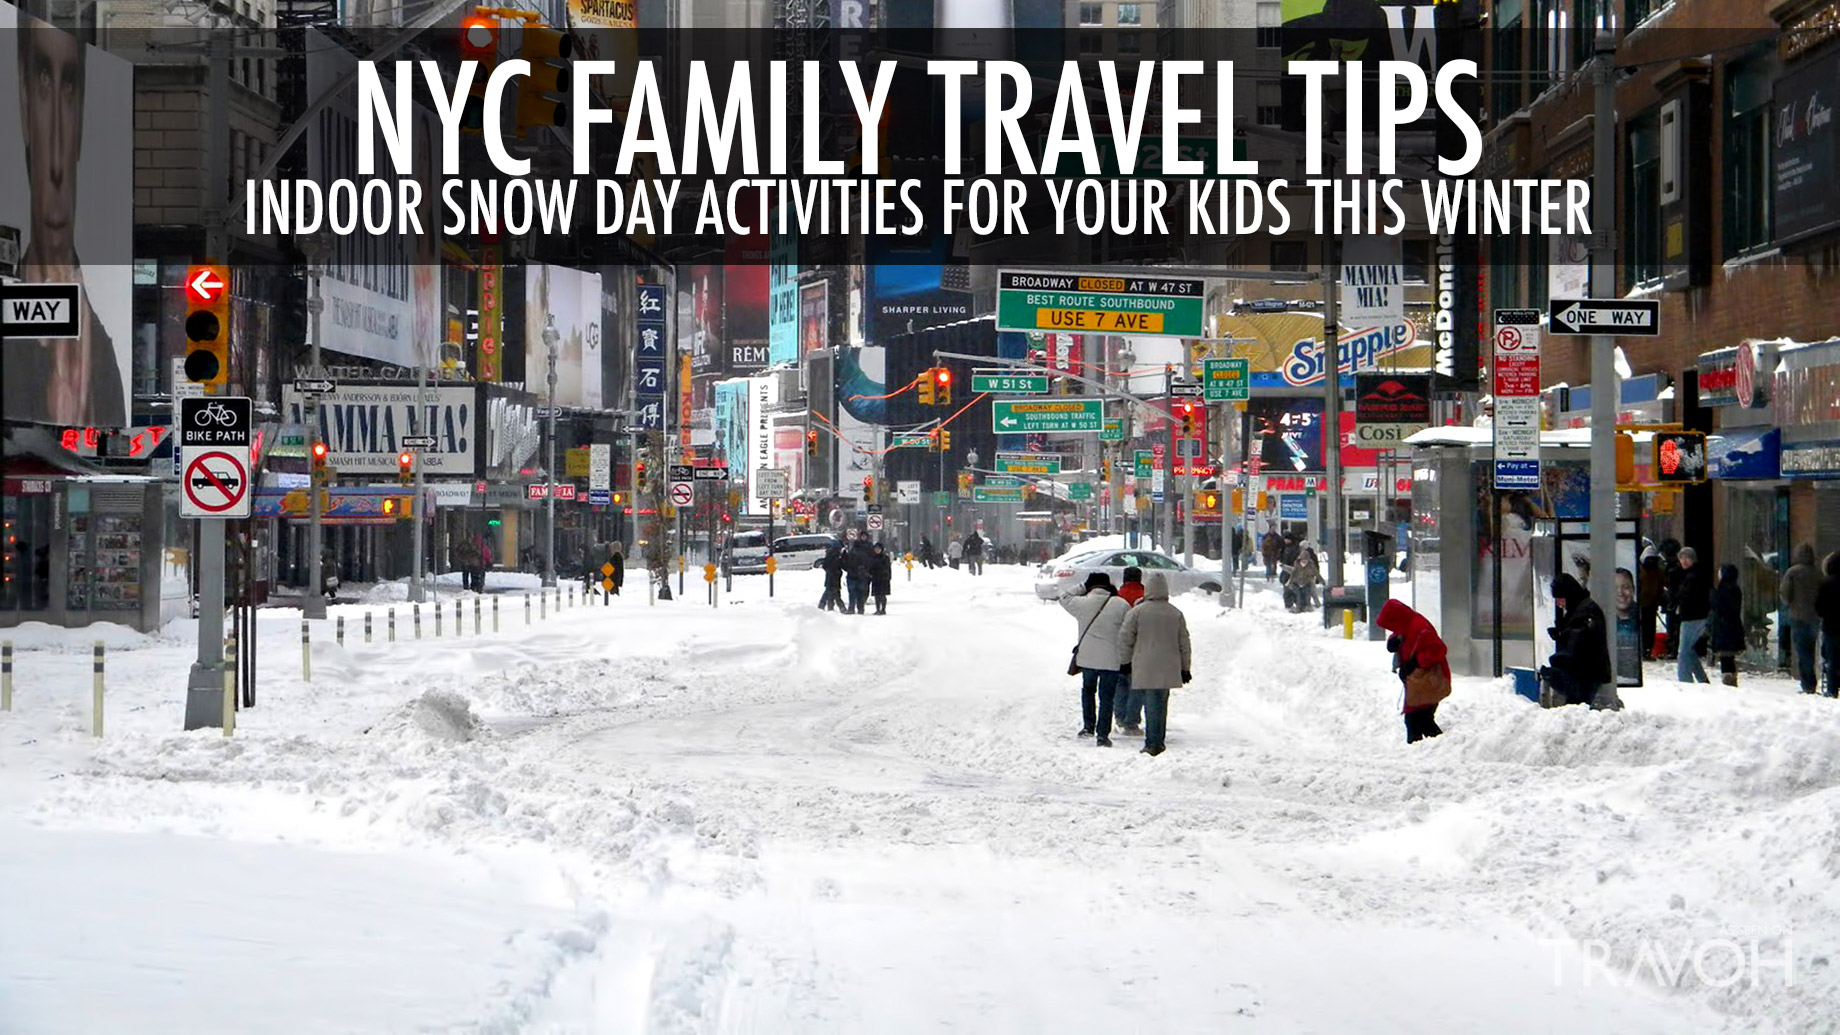 NYC Family Travel Tips - Indoor Snow Day Activities for Your Kids This Winter